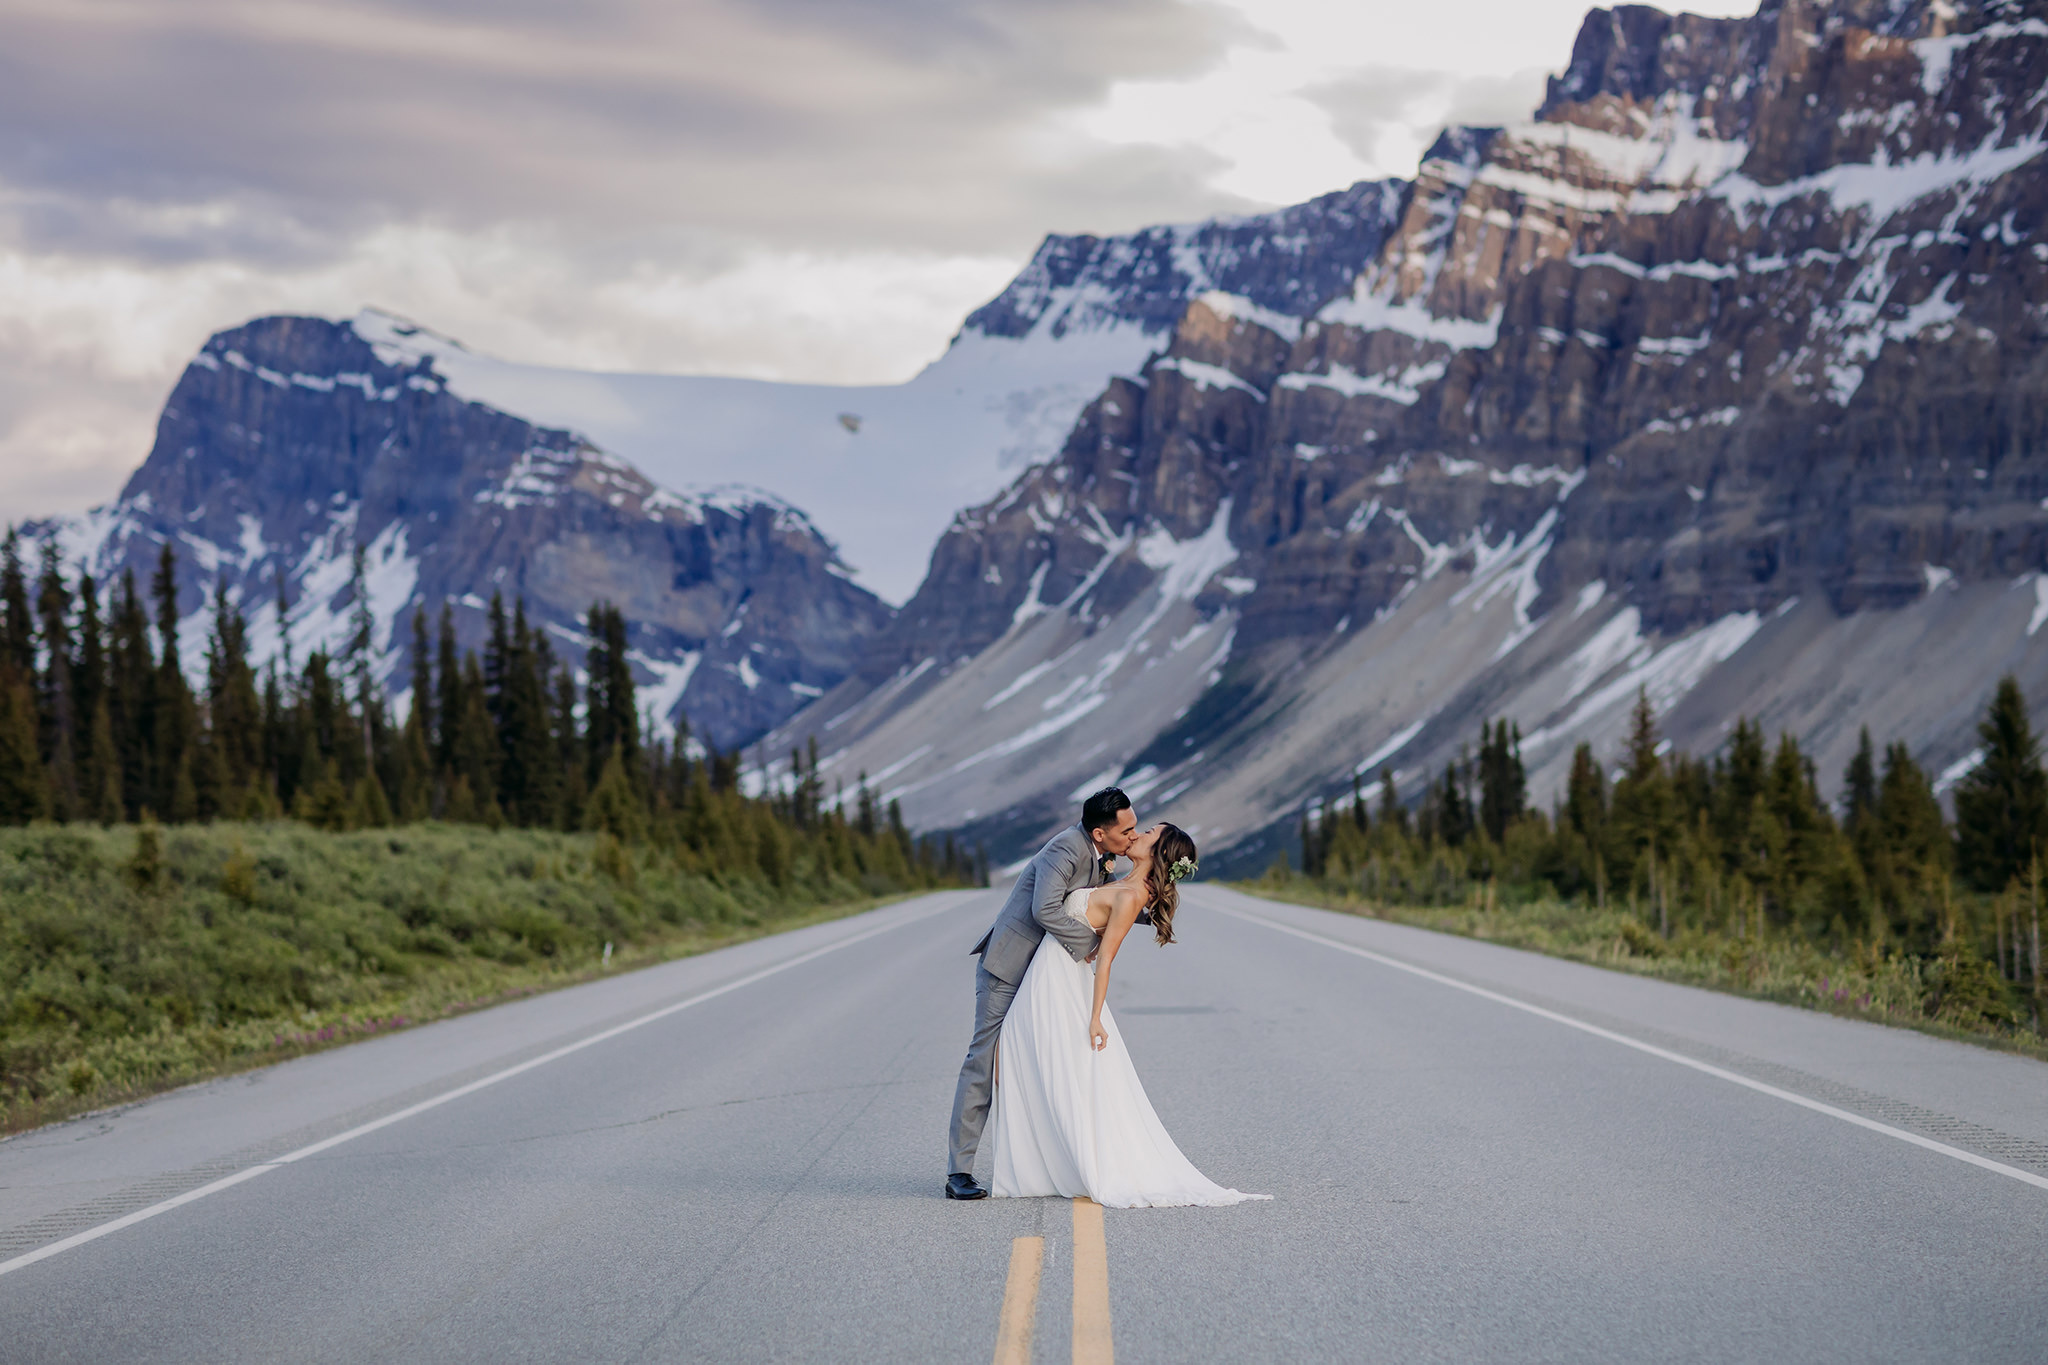 Icefields Parkway elopement highway mountain wedding portraits by Banff intimate wedding photographer ENV Photography